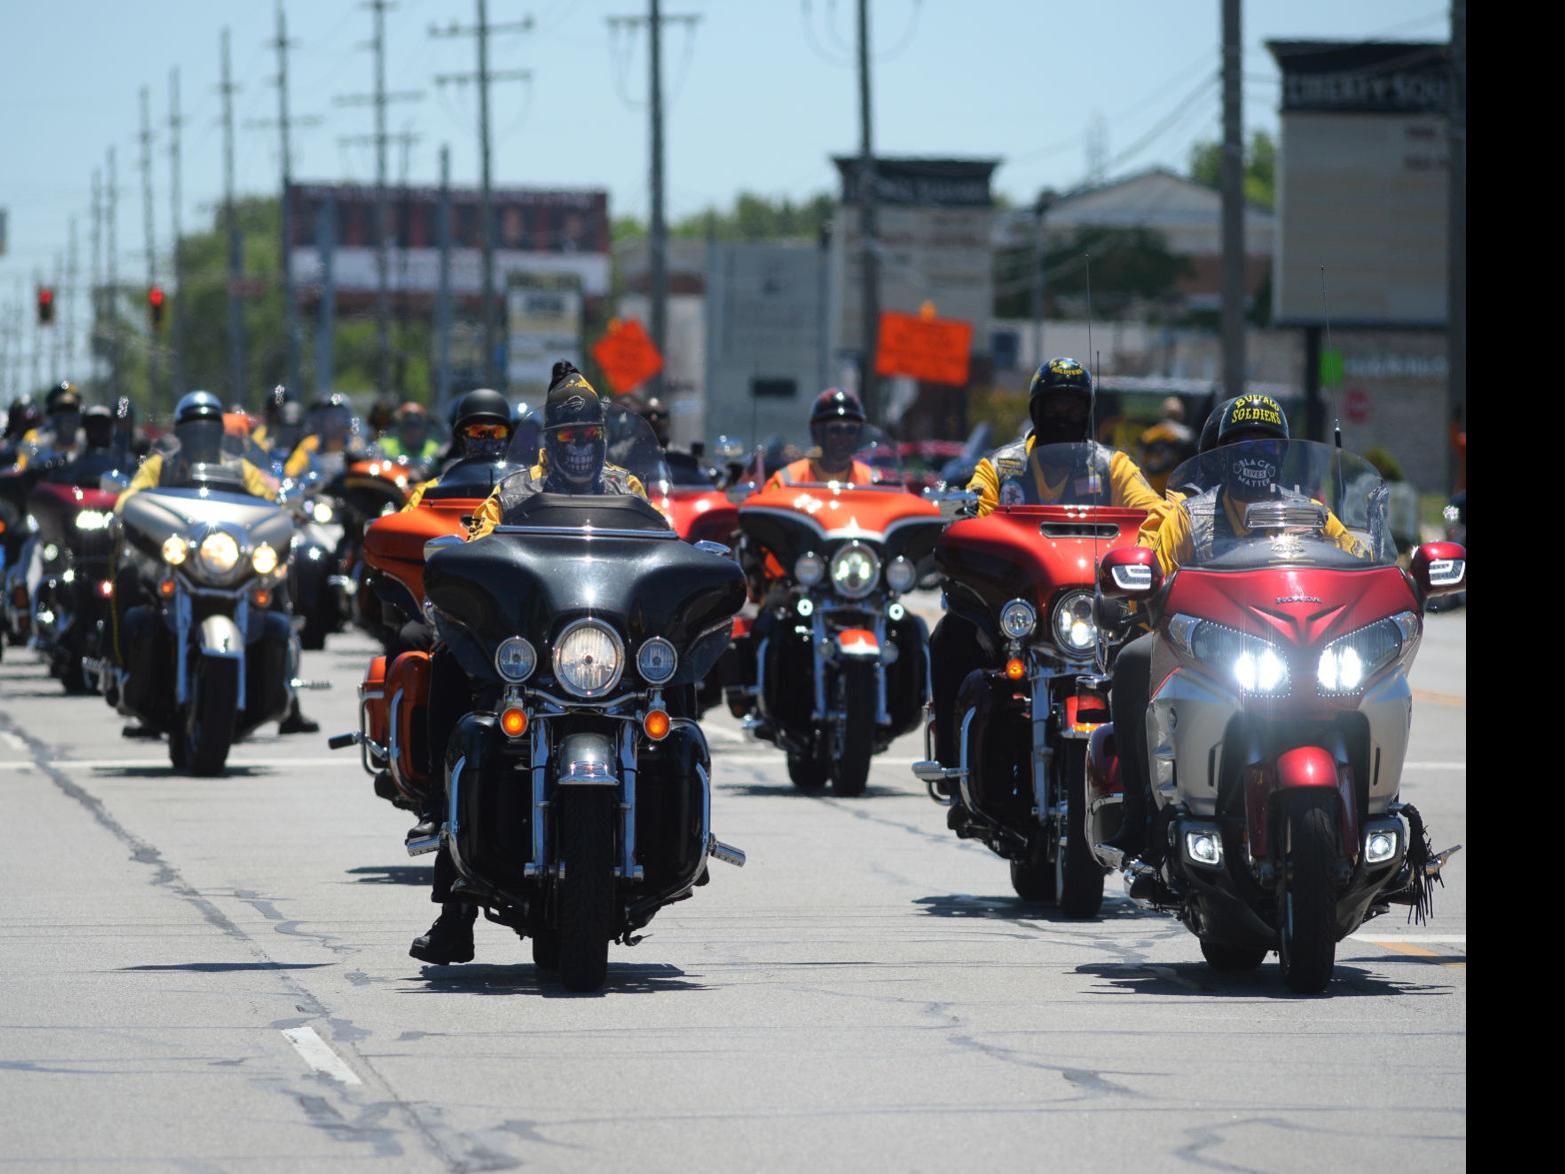 WATCH NOW: Soldiers bikers Broadway for unity, justice Latest Headlines | nwitimes.com